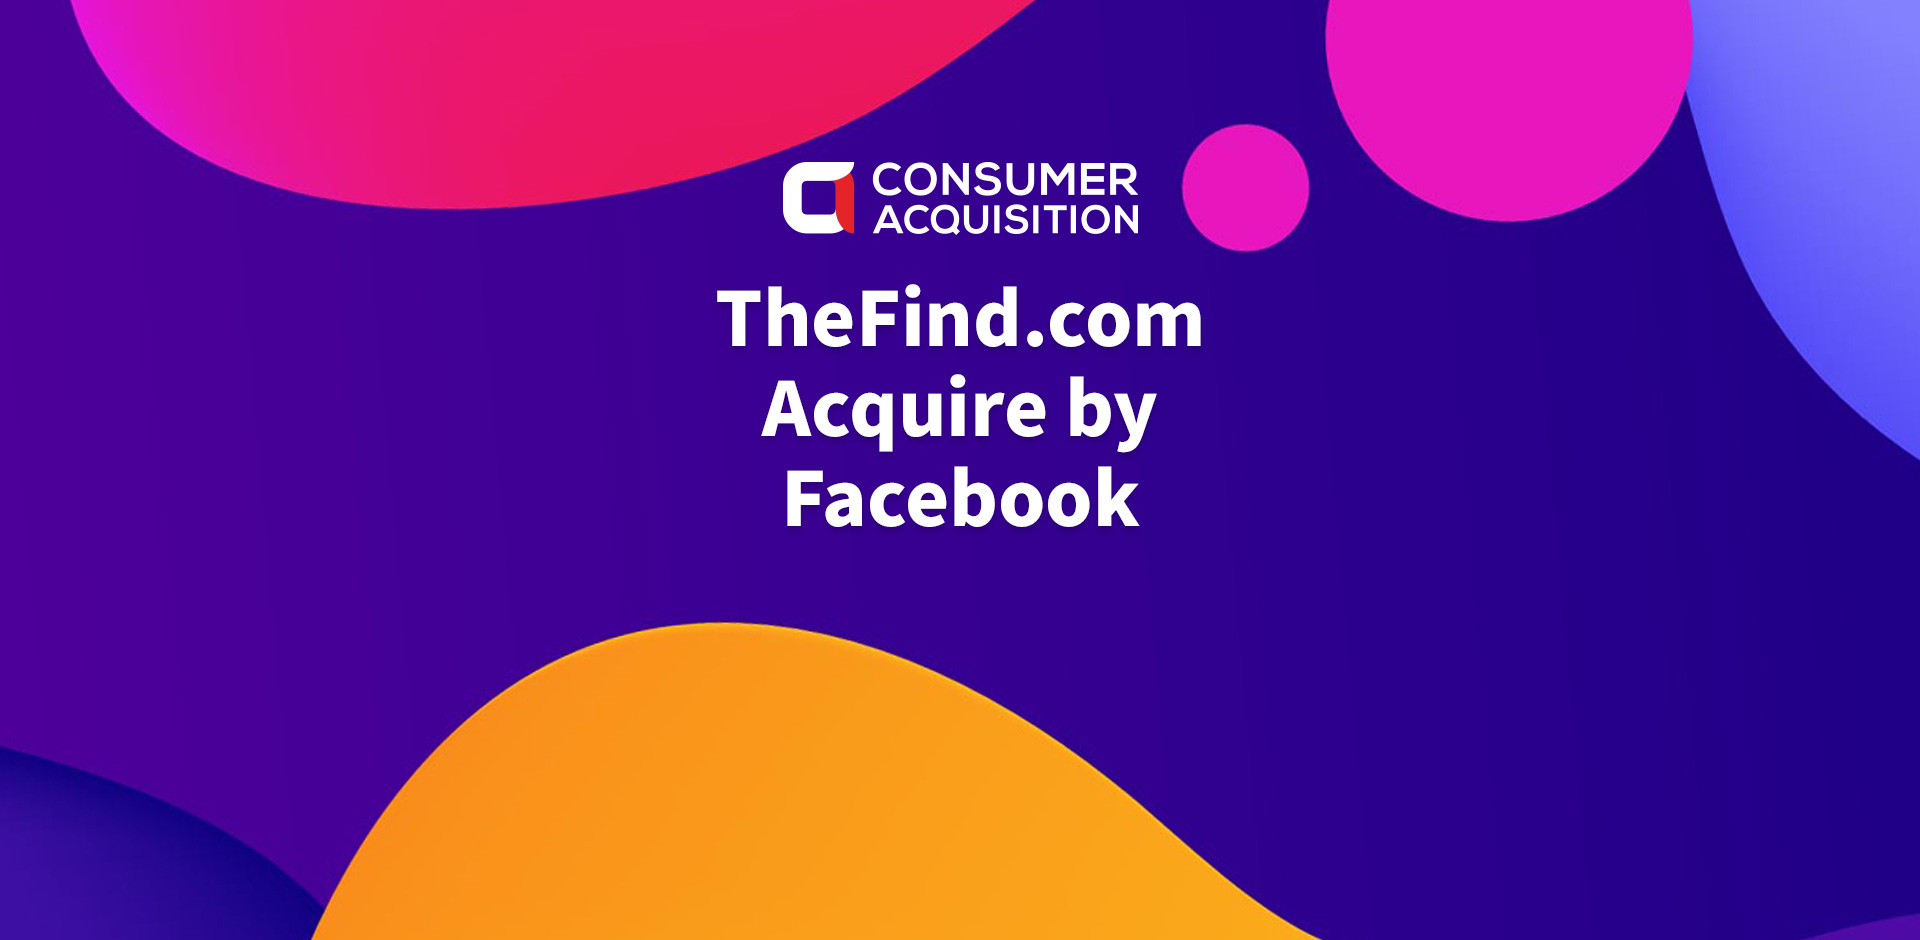 TheFind.com acquired by Facebook!